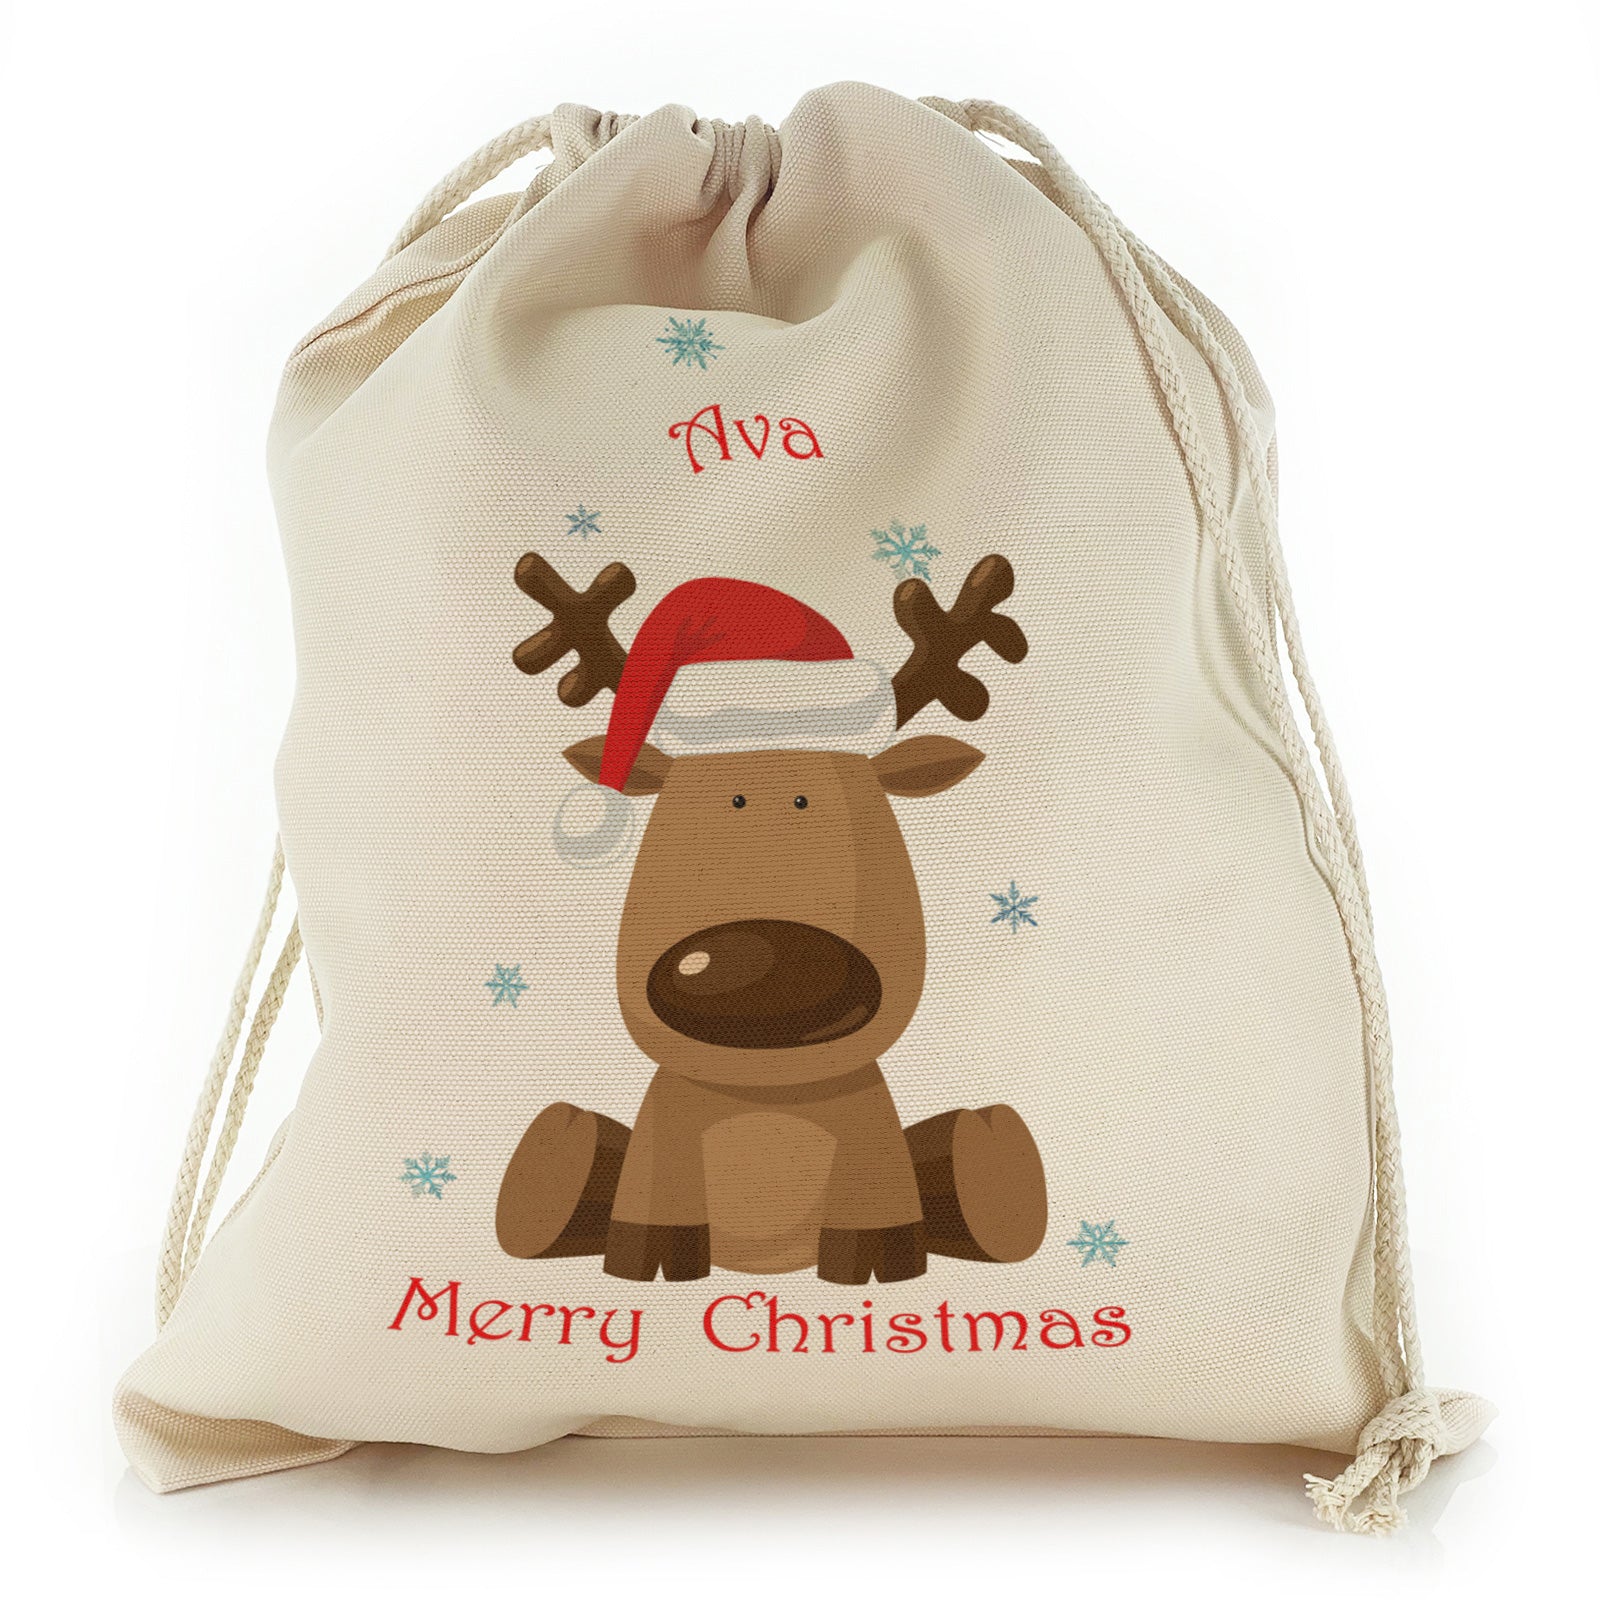 Personalised Canvas Sack with Festive Text and Santa Hat Reindeer